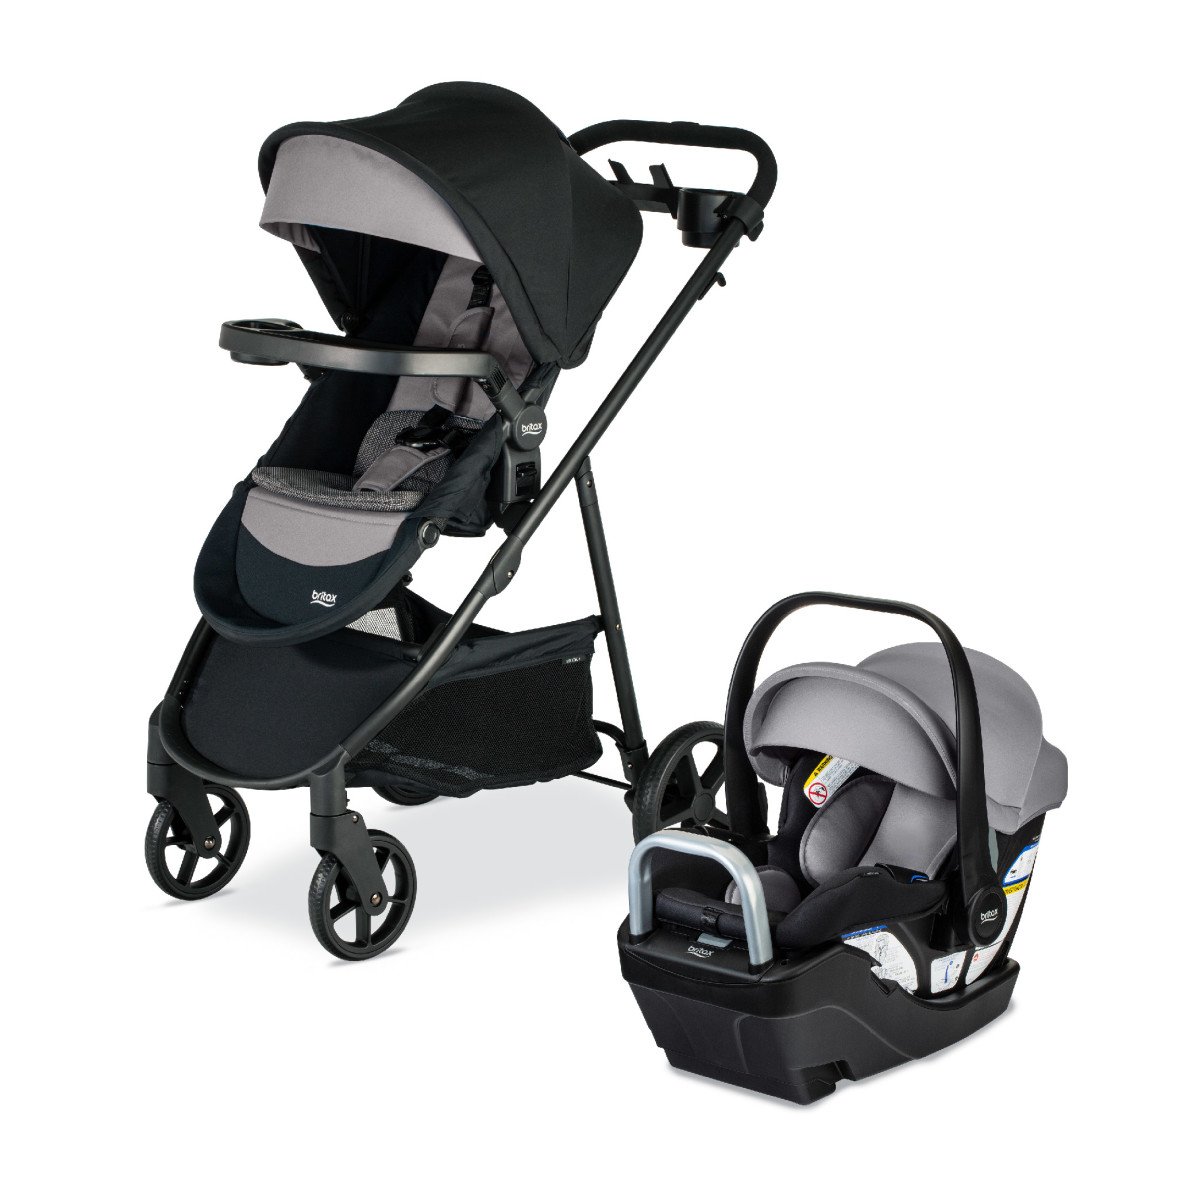 Left Facing view of the Willow S Infant Car Seat and Brook+ Stroller